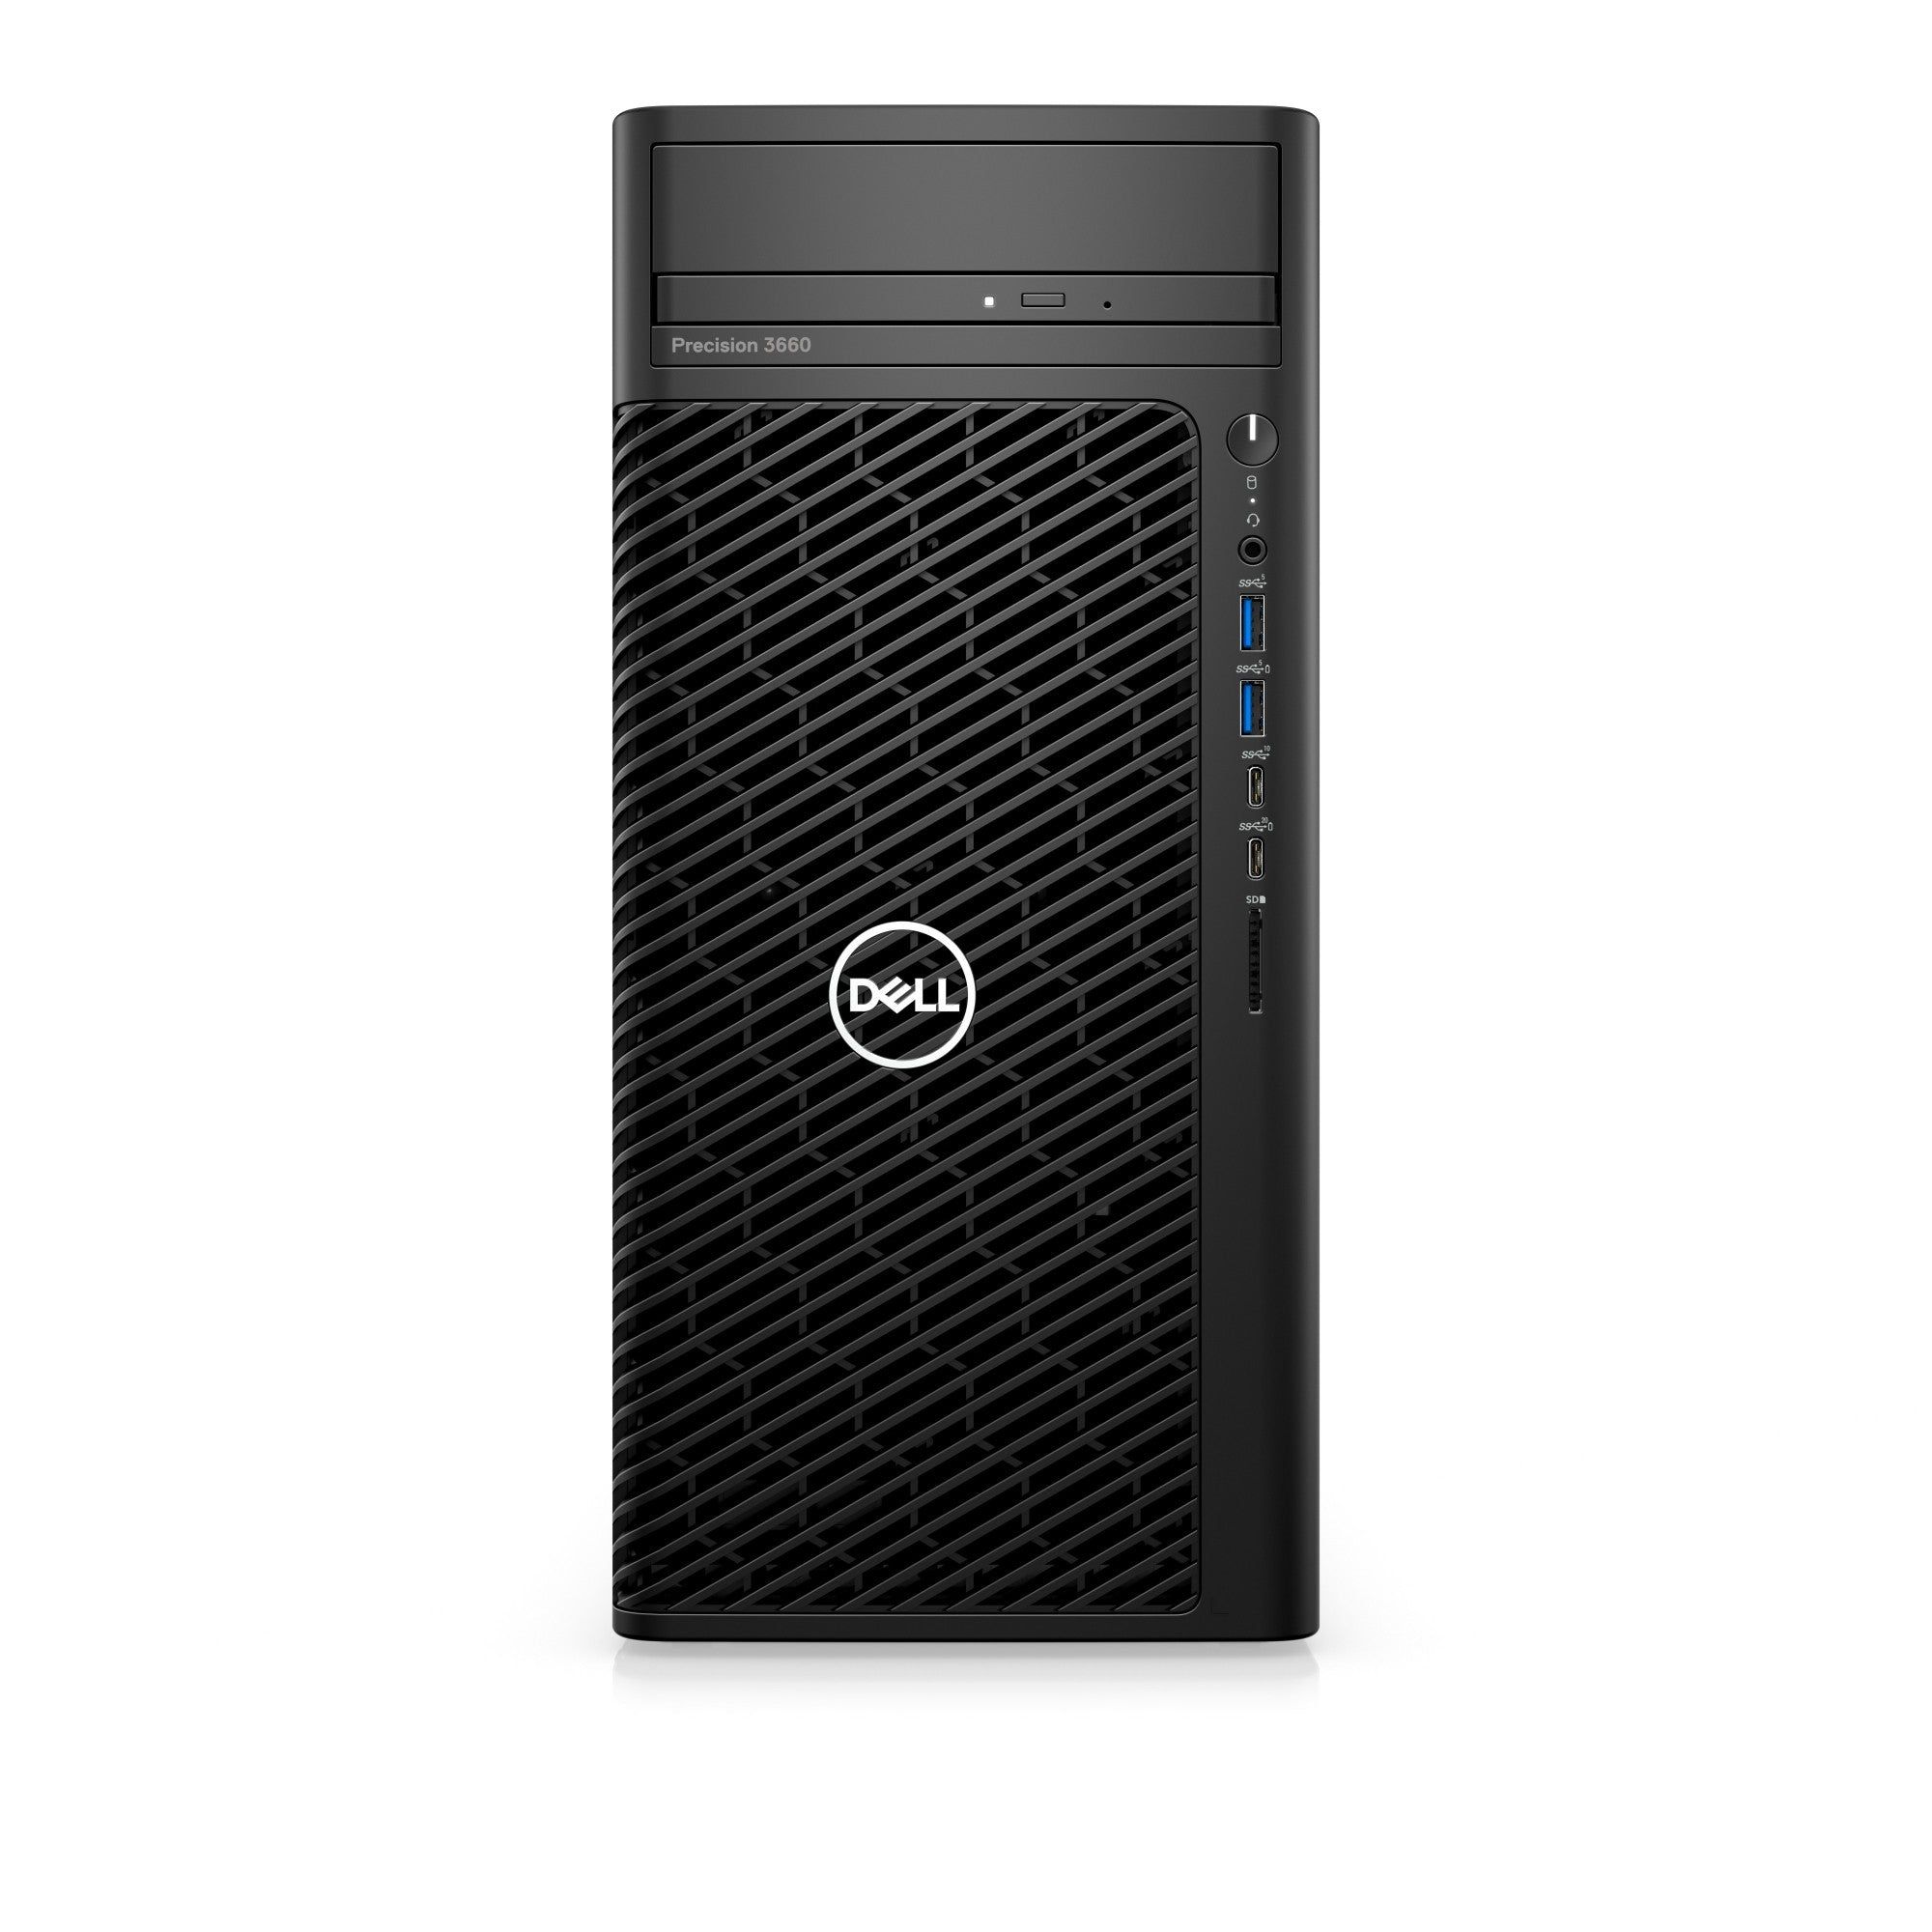 Dell Precision 3660 Tower,Intel Core i9-13900K(36MB, 24Core(8+16),3.0GHz/5.8GHz),64GB(2x32)4400MHz DDR5,1TB(M.2)NVMe PCIe SSD,noDVD,Nvidia GeForce RTX 4090/24GB,noWi-Fi,Dell Mouse-MS116,Dell Keyboard-KB216,Win11Pro,3Yr NBD_2